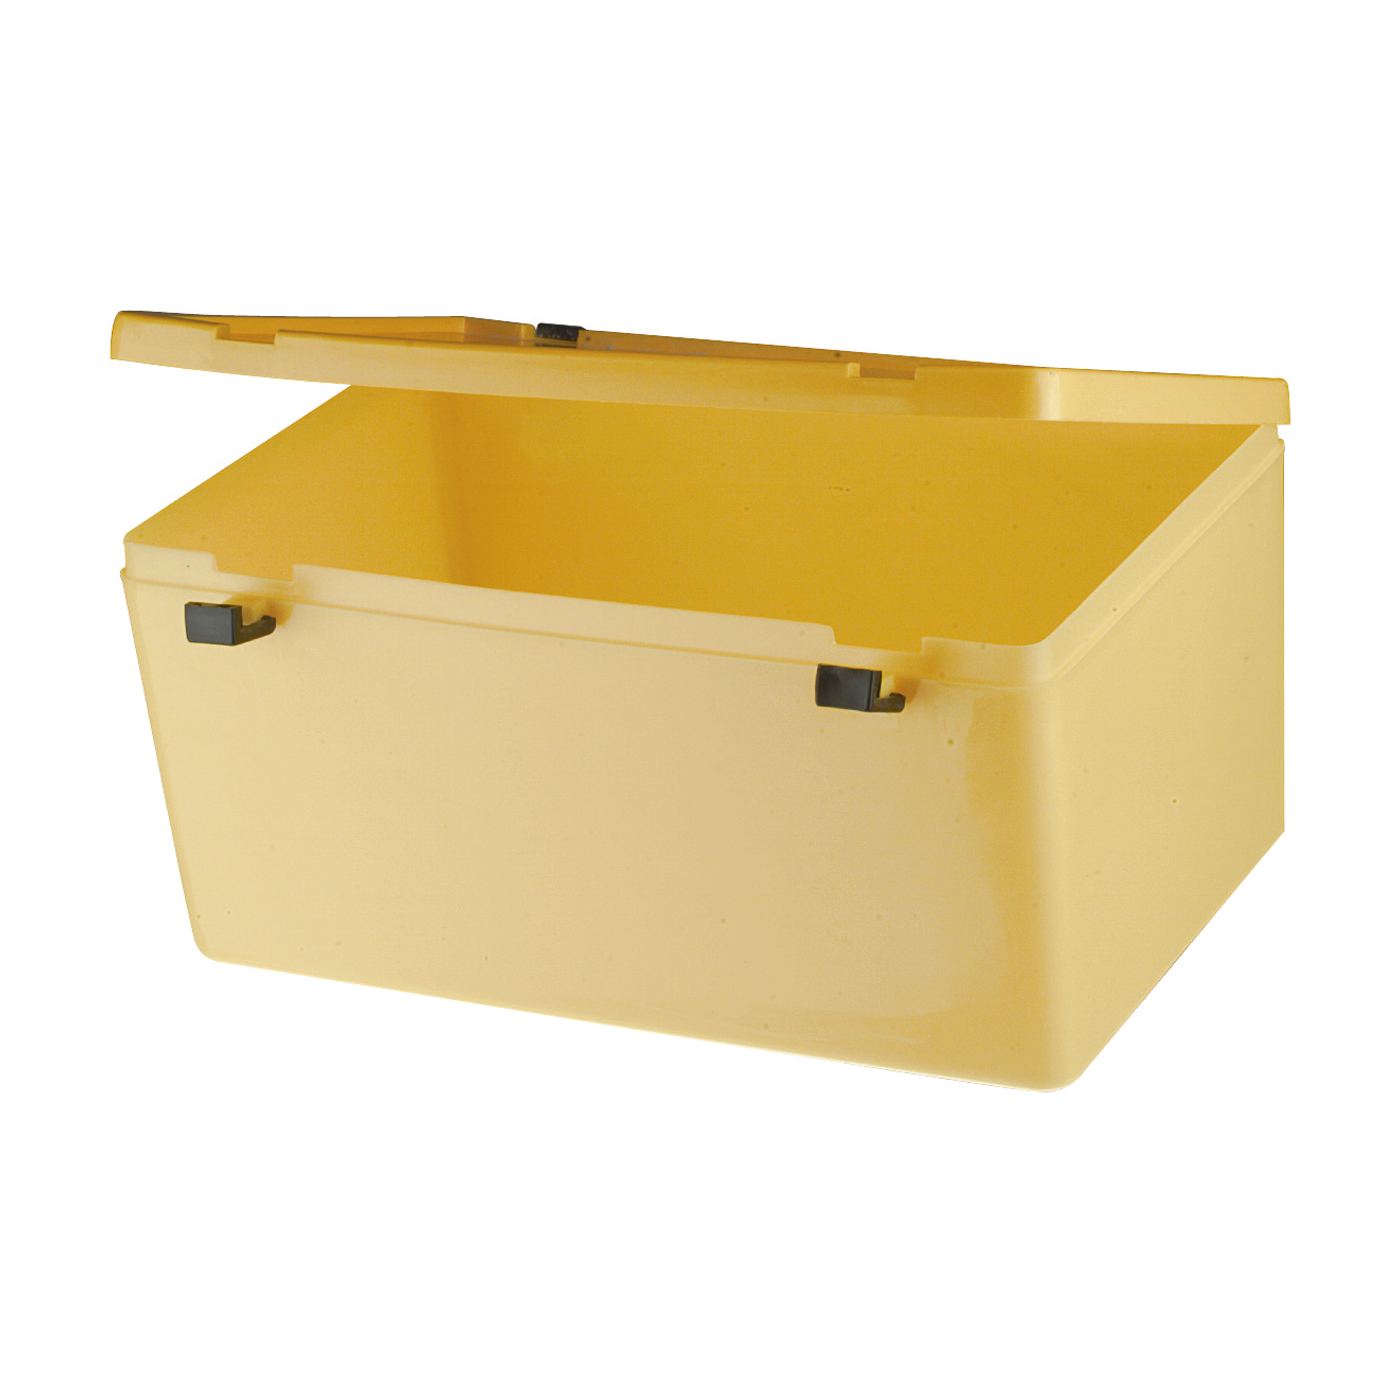 Dispatch Container, 4.5 l, Yellow - 1 piece